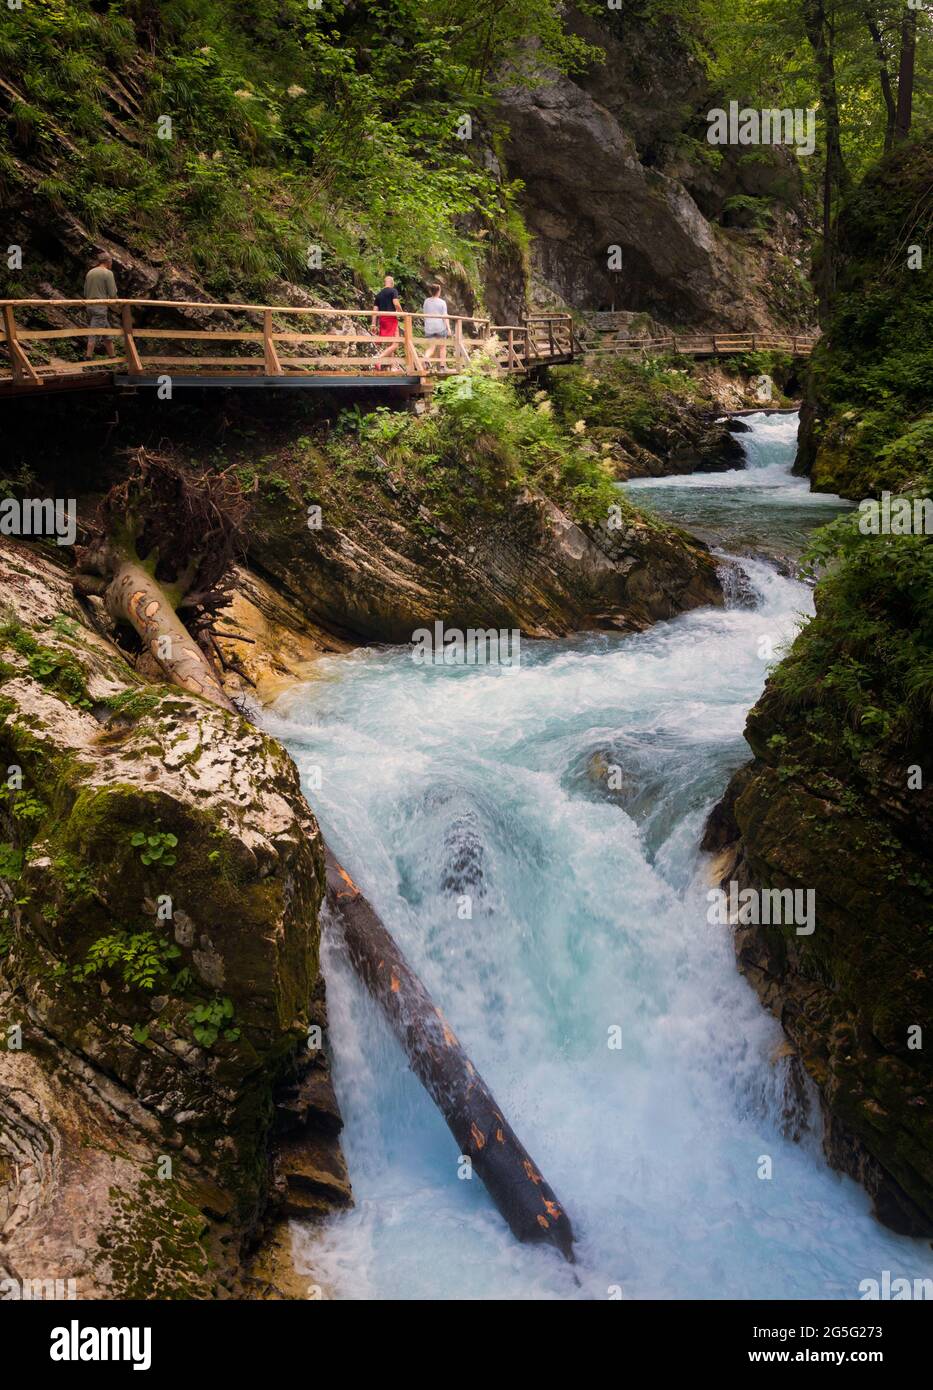 The Radovna river cutting through the Vintgar Gorge near Bled, Upper Carniola, Slovenia.  The gorge is in the Triglav National Park.  Visitors walking Stock Photo